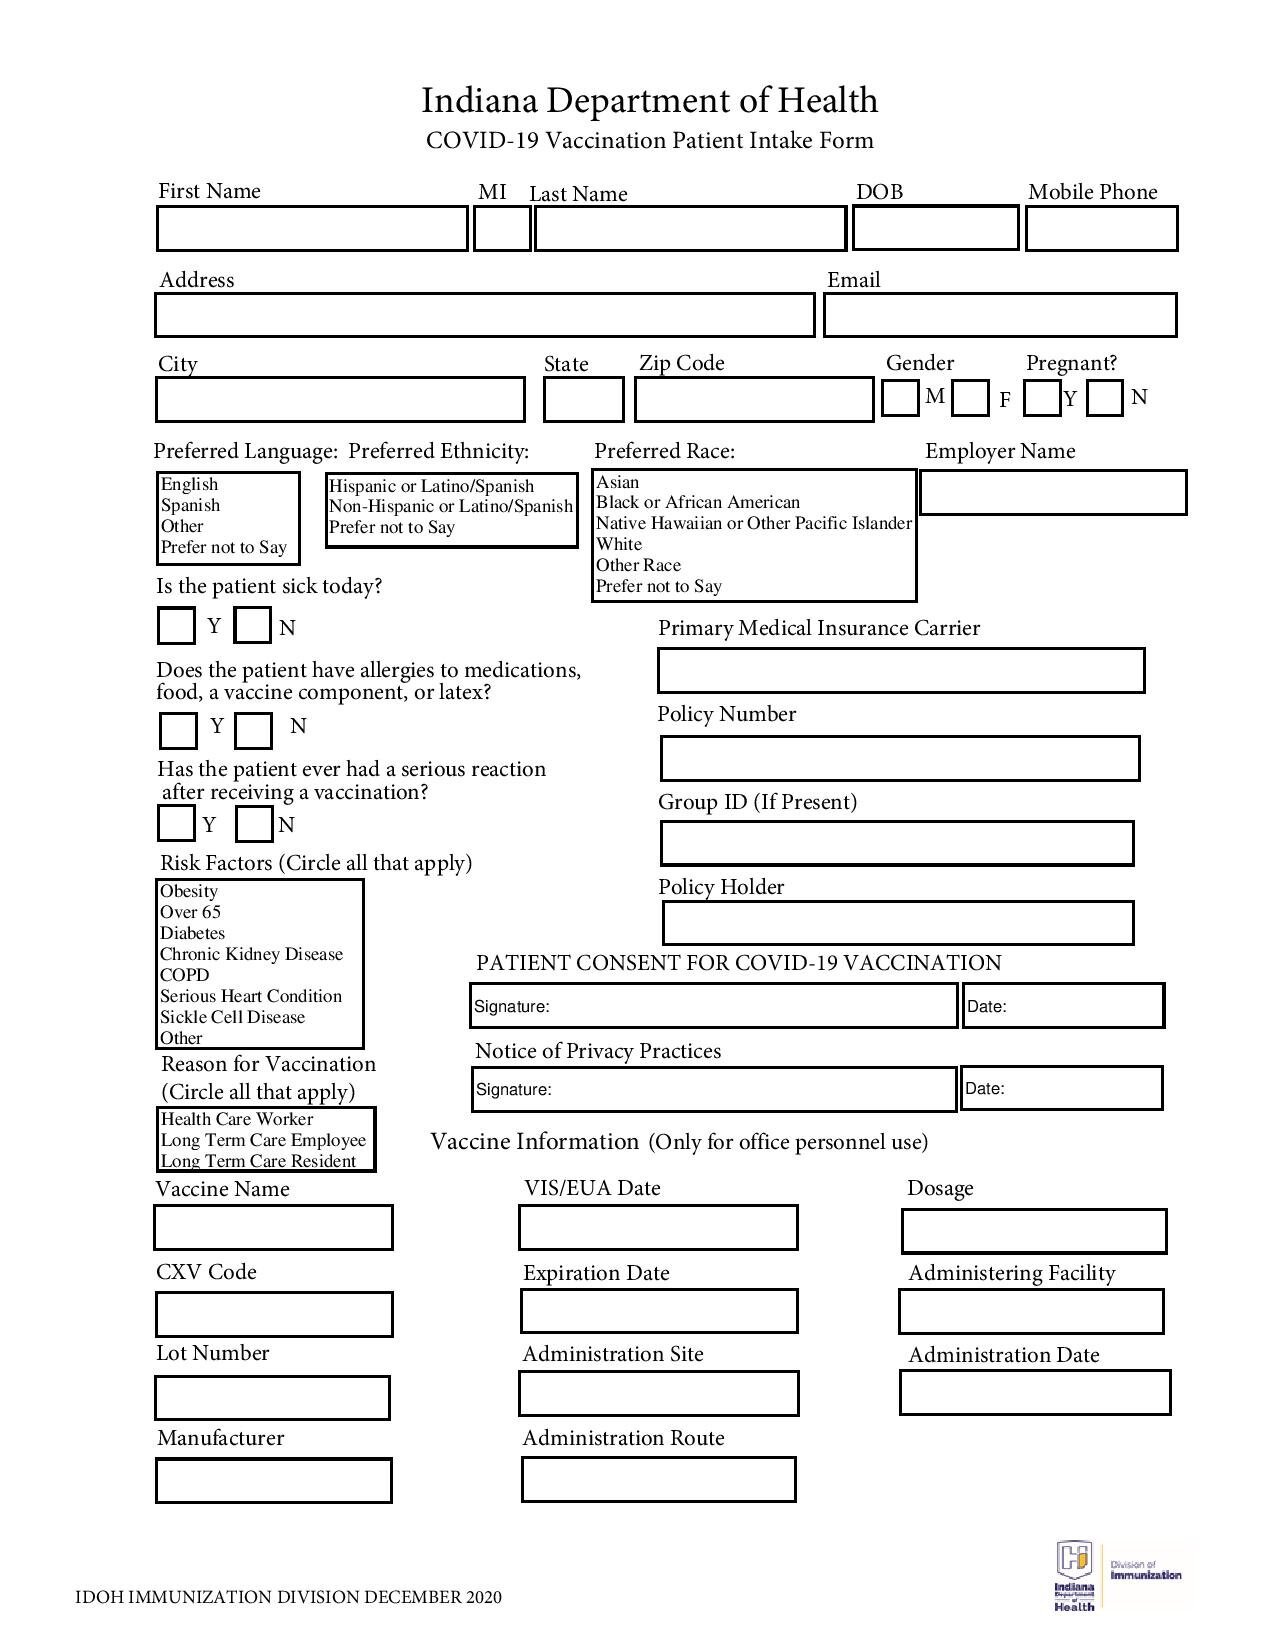 COVID-19+Vaccine+Patient+Intake+Form+(ENGL)-page-001.jpg